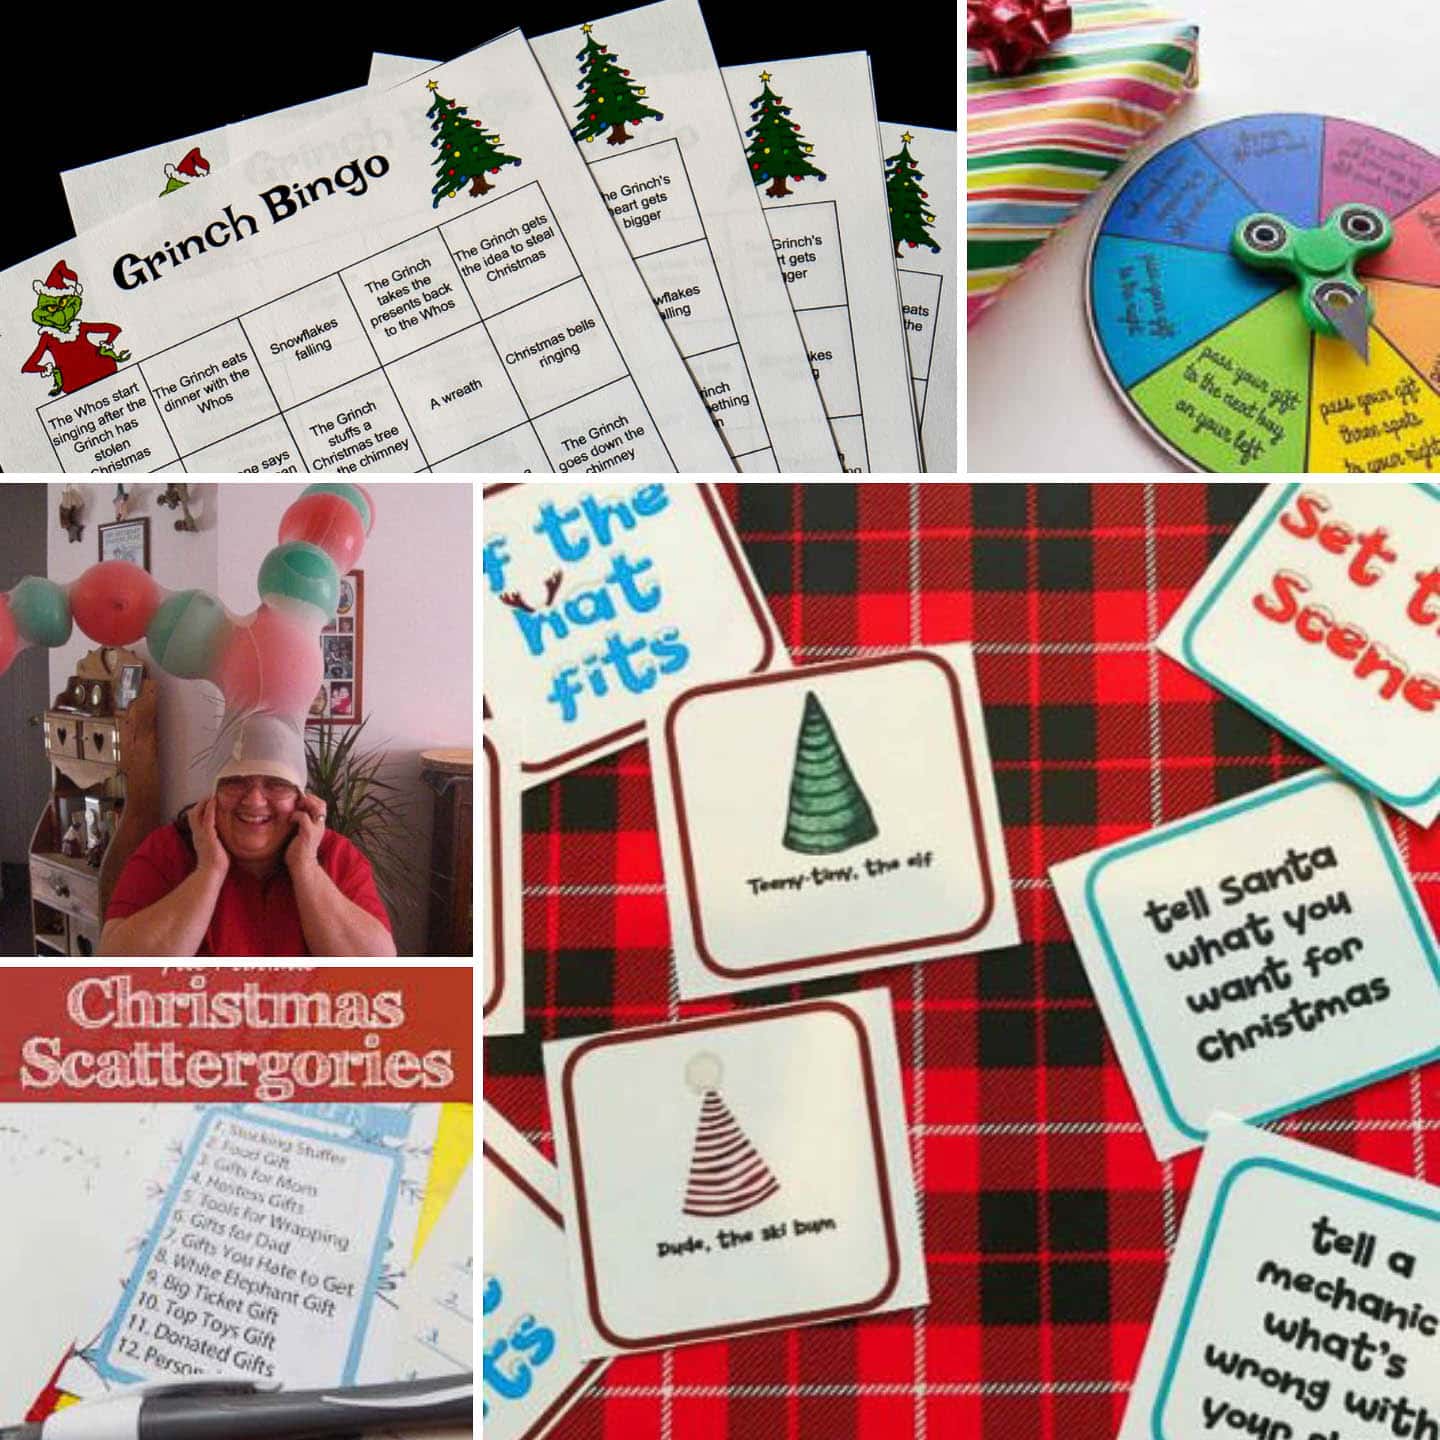 Grinch bingo, gift passing game, reindeer antler game, printable Christmas Scattergories game, Christmas party group game